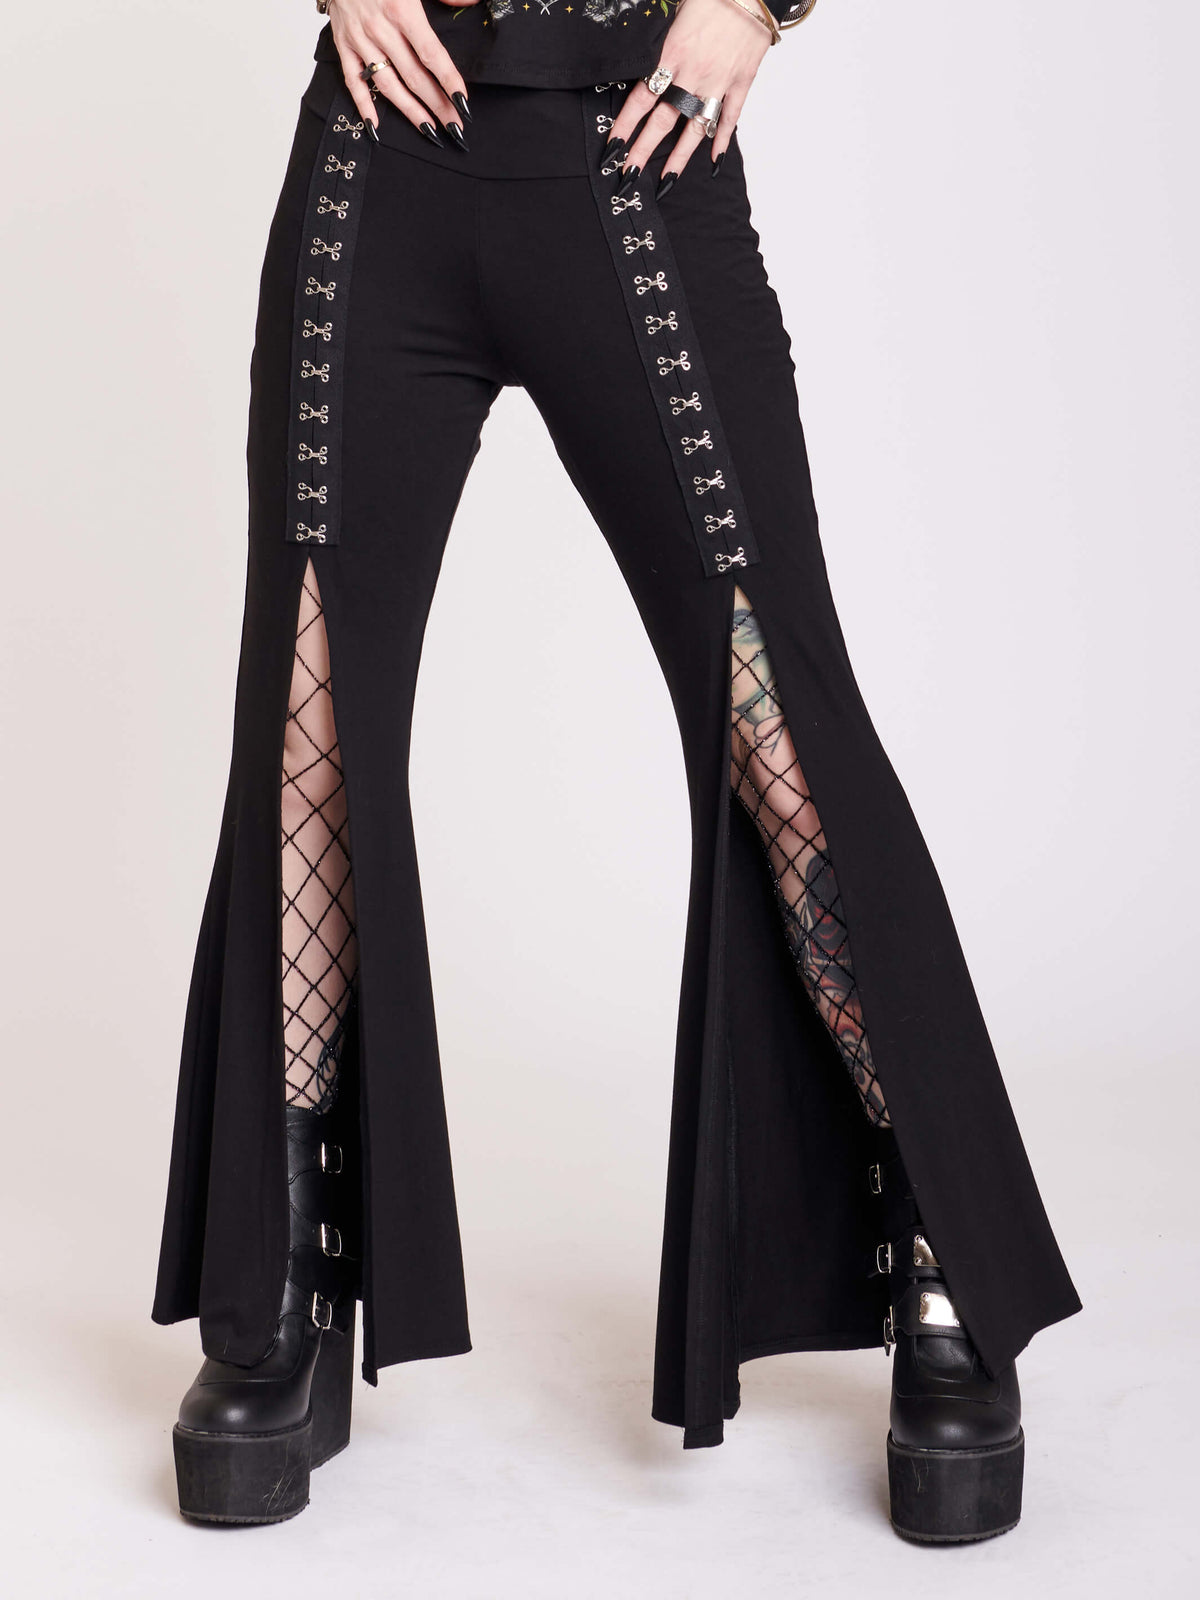 Black jersey palazzo pants with large hook and eye details and split center seam